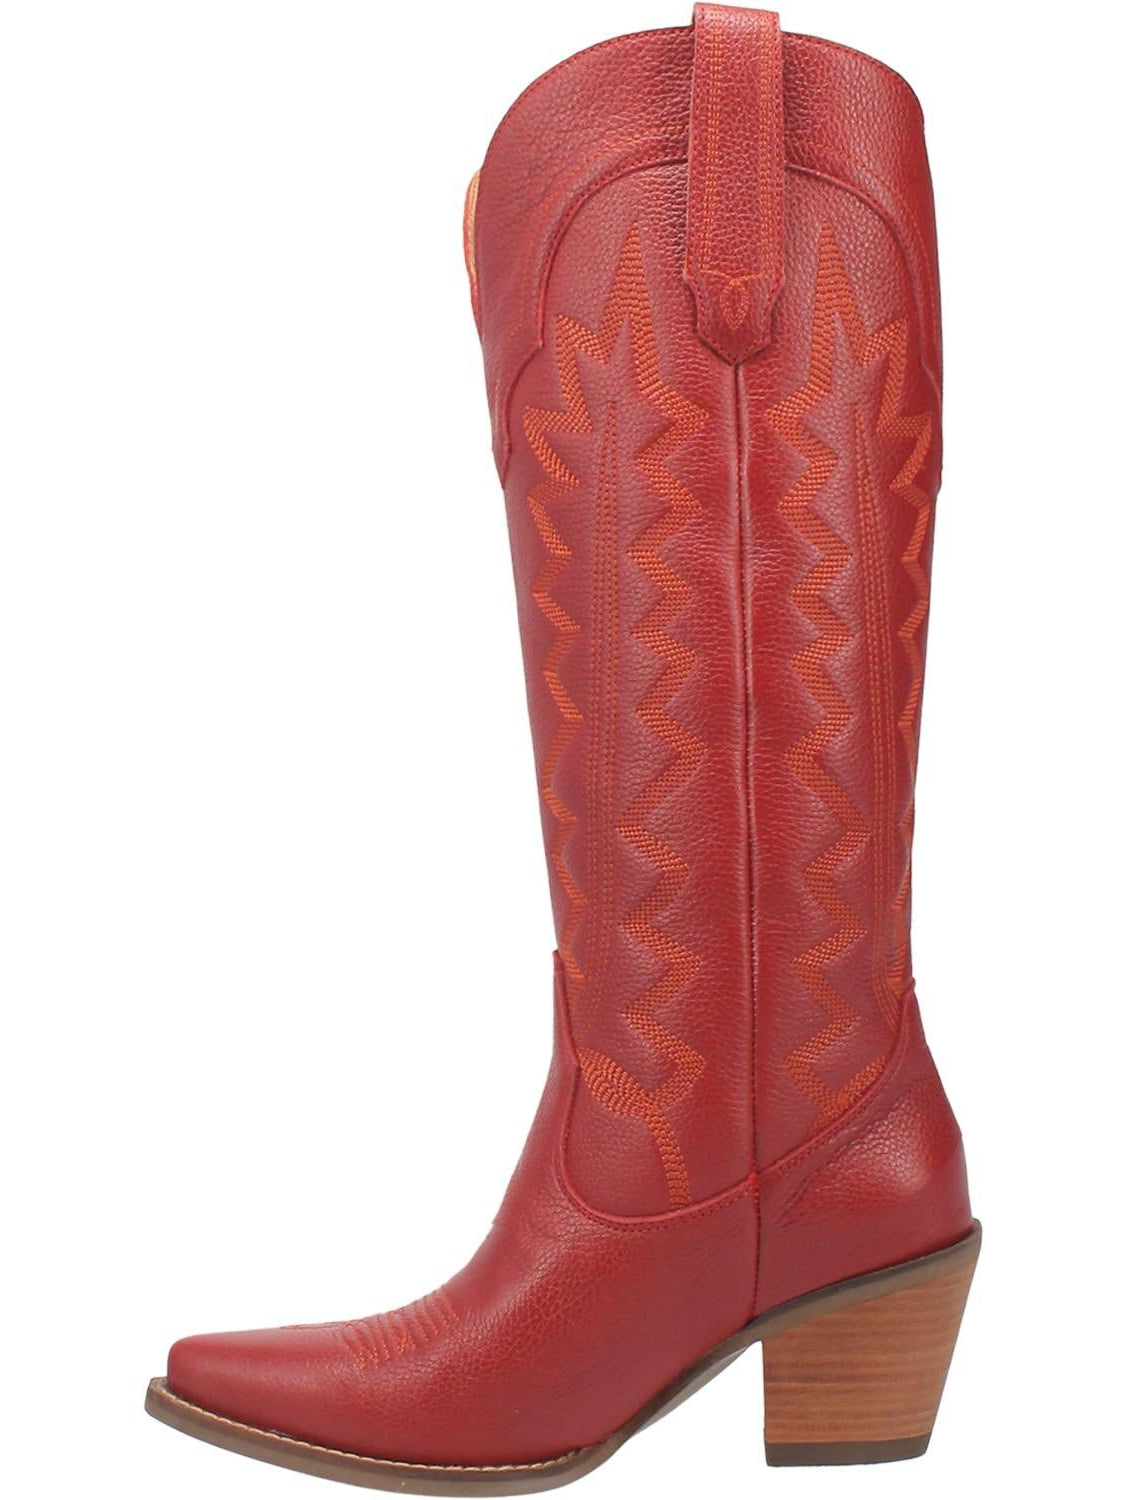 High Cotton Boot by Dingo from Dan Post - Red